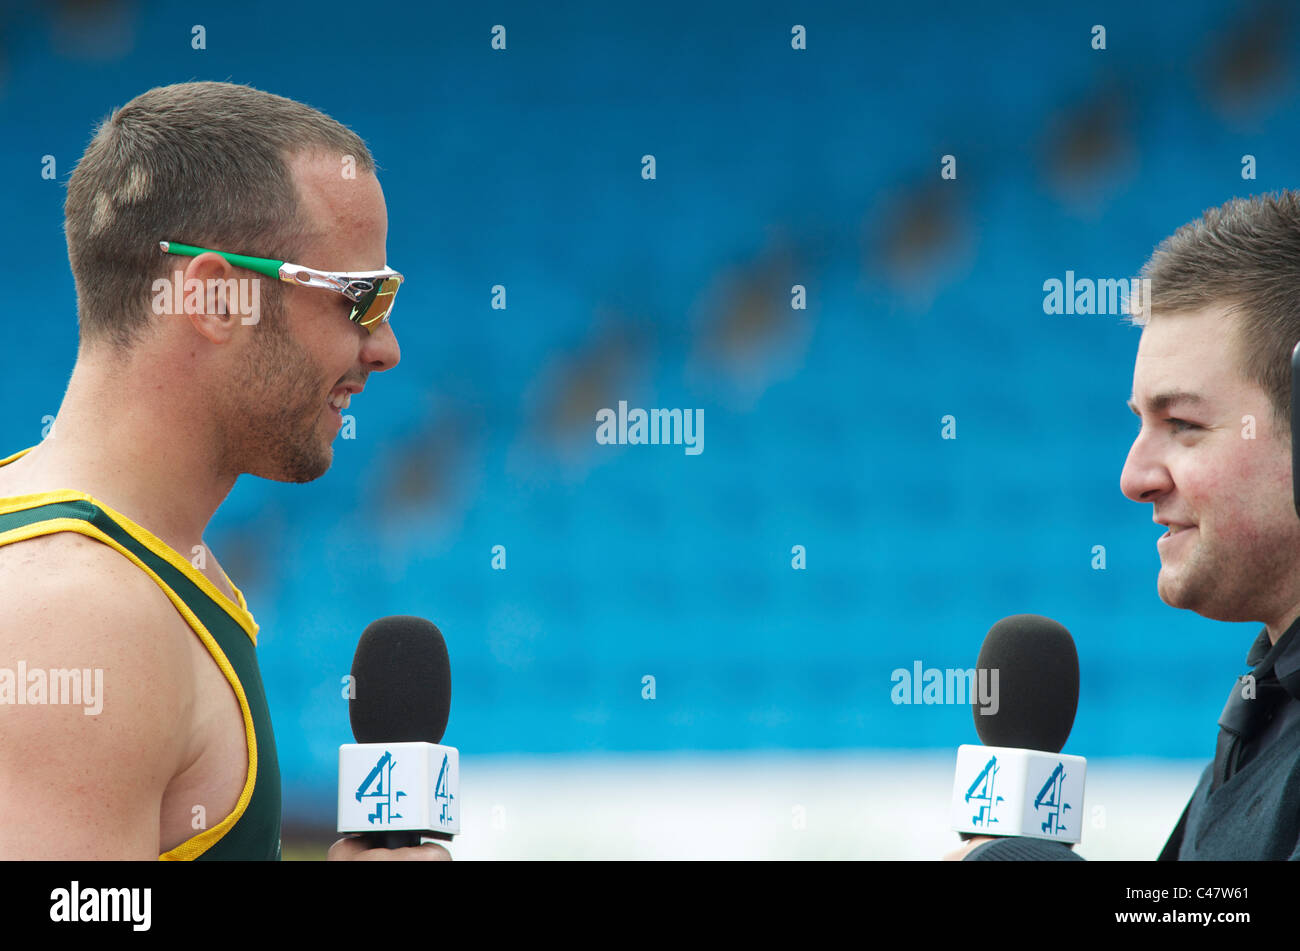 oscar pistorius being interviewed by Channel 4 after winning at paralympic world cup, manchester, may 2011 Stock Photo